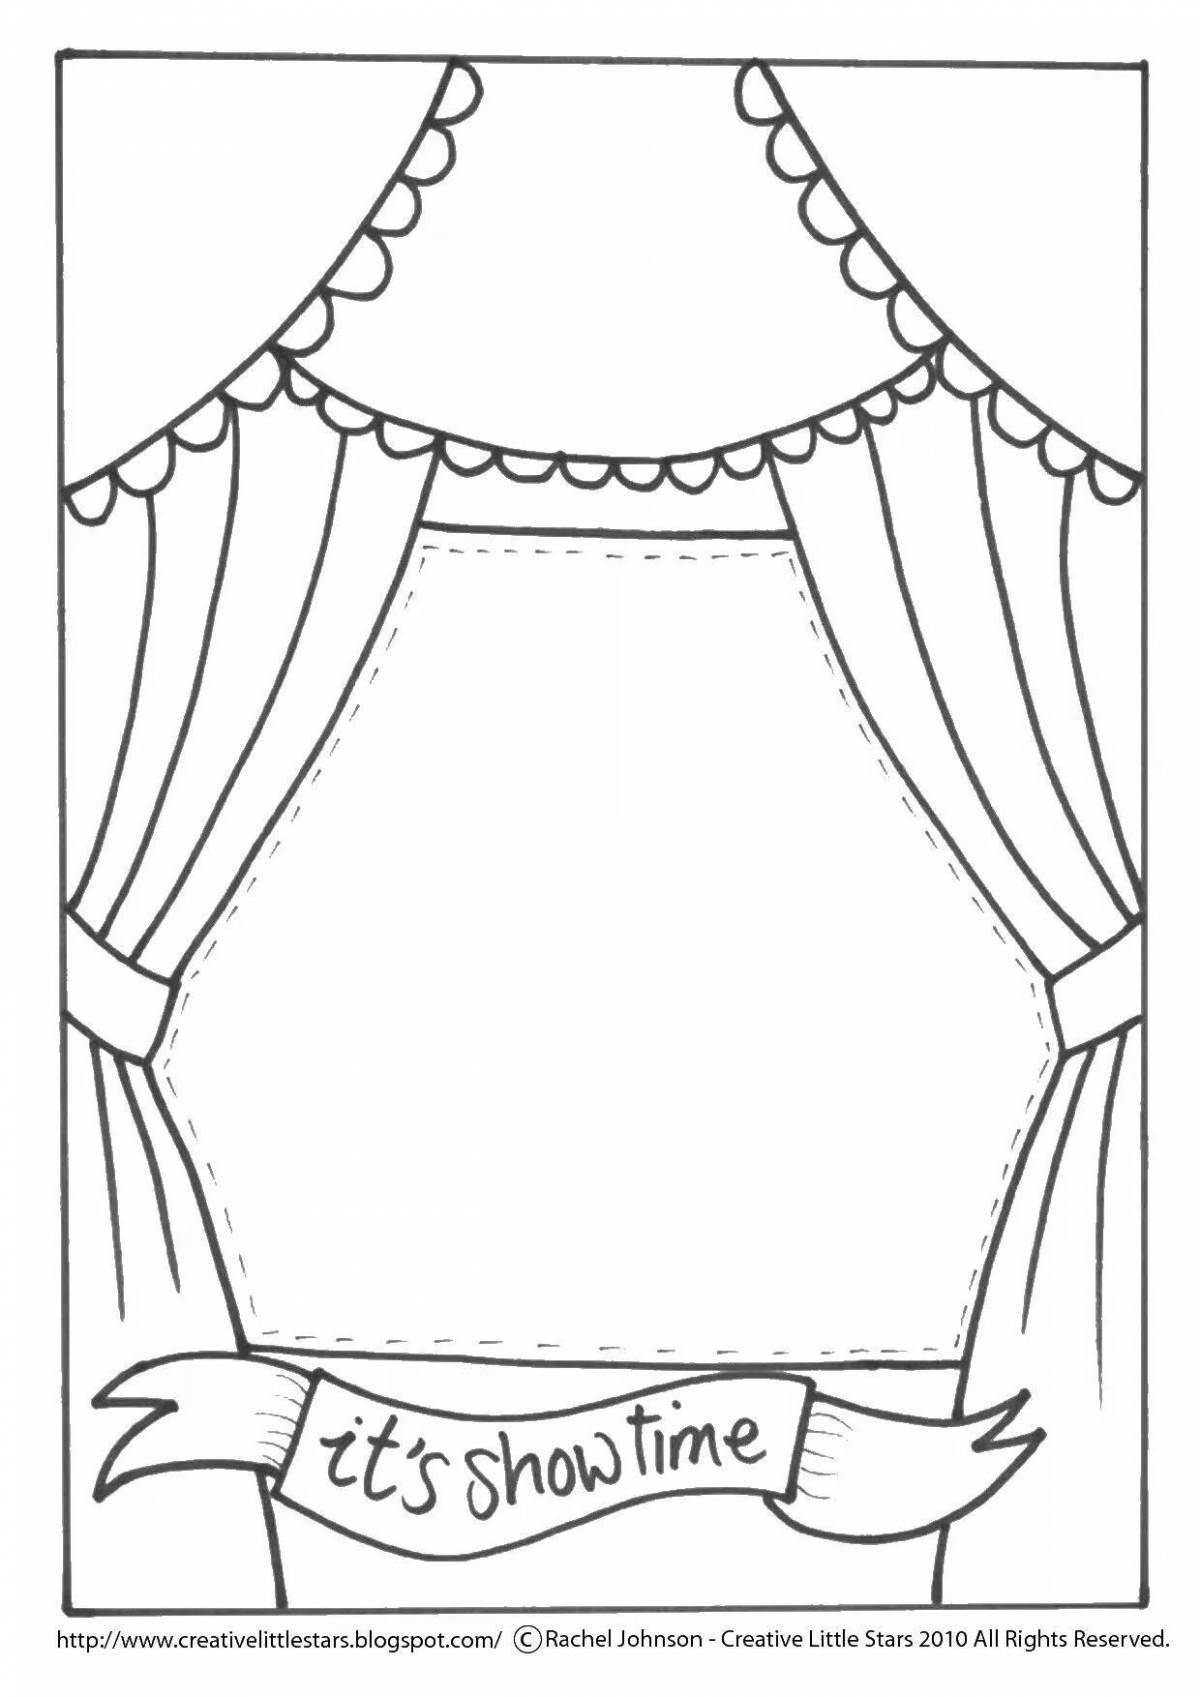 Exquisite puppet theater coloring book